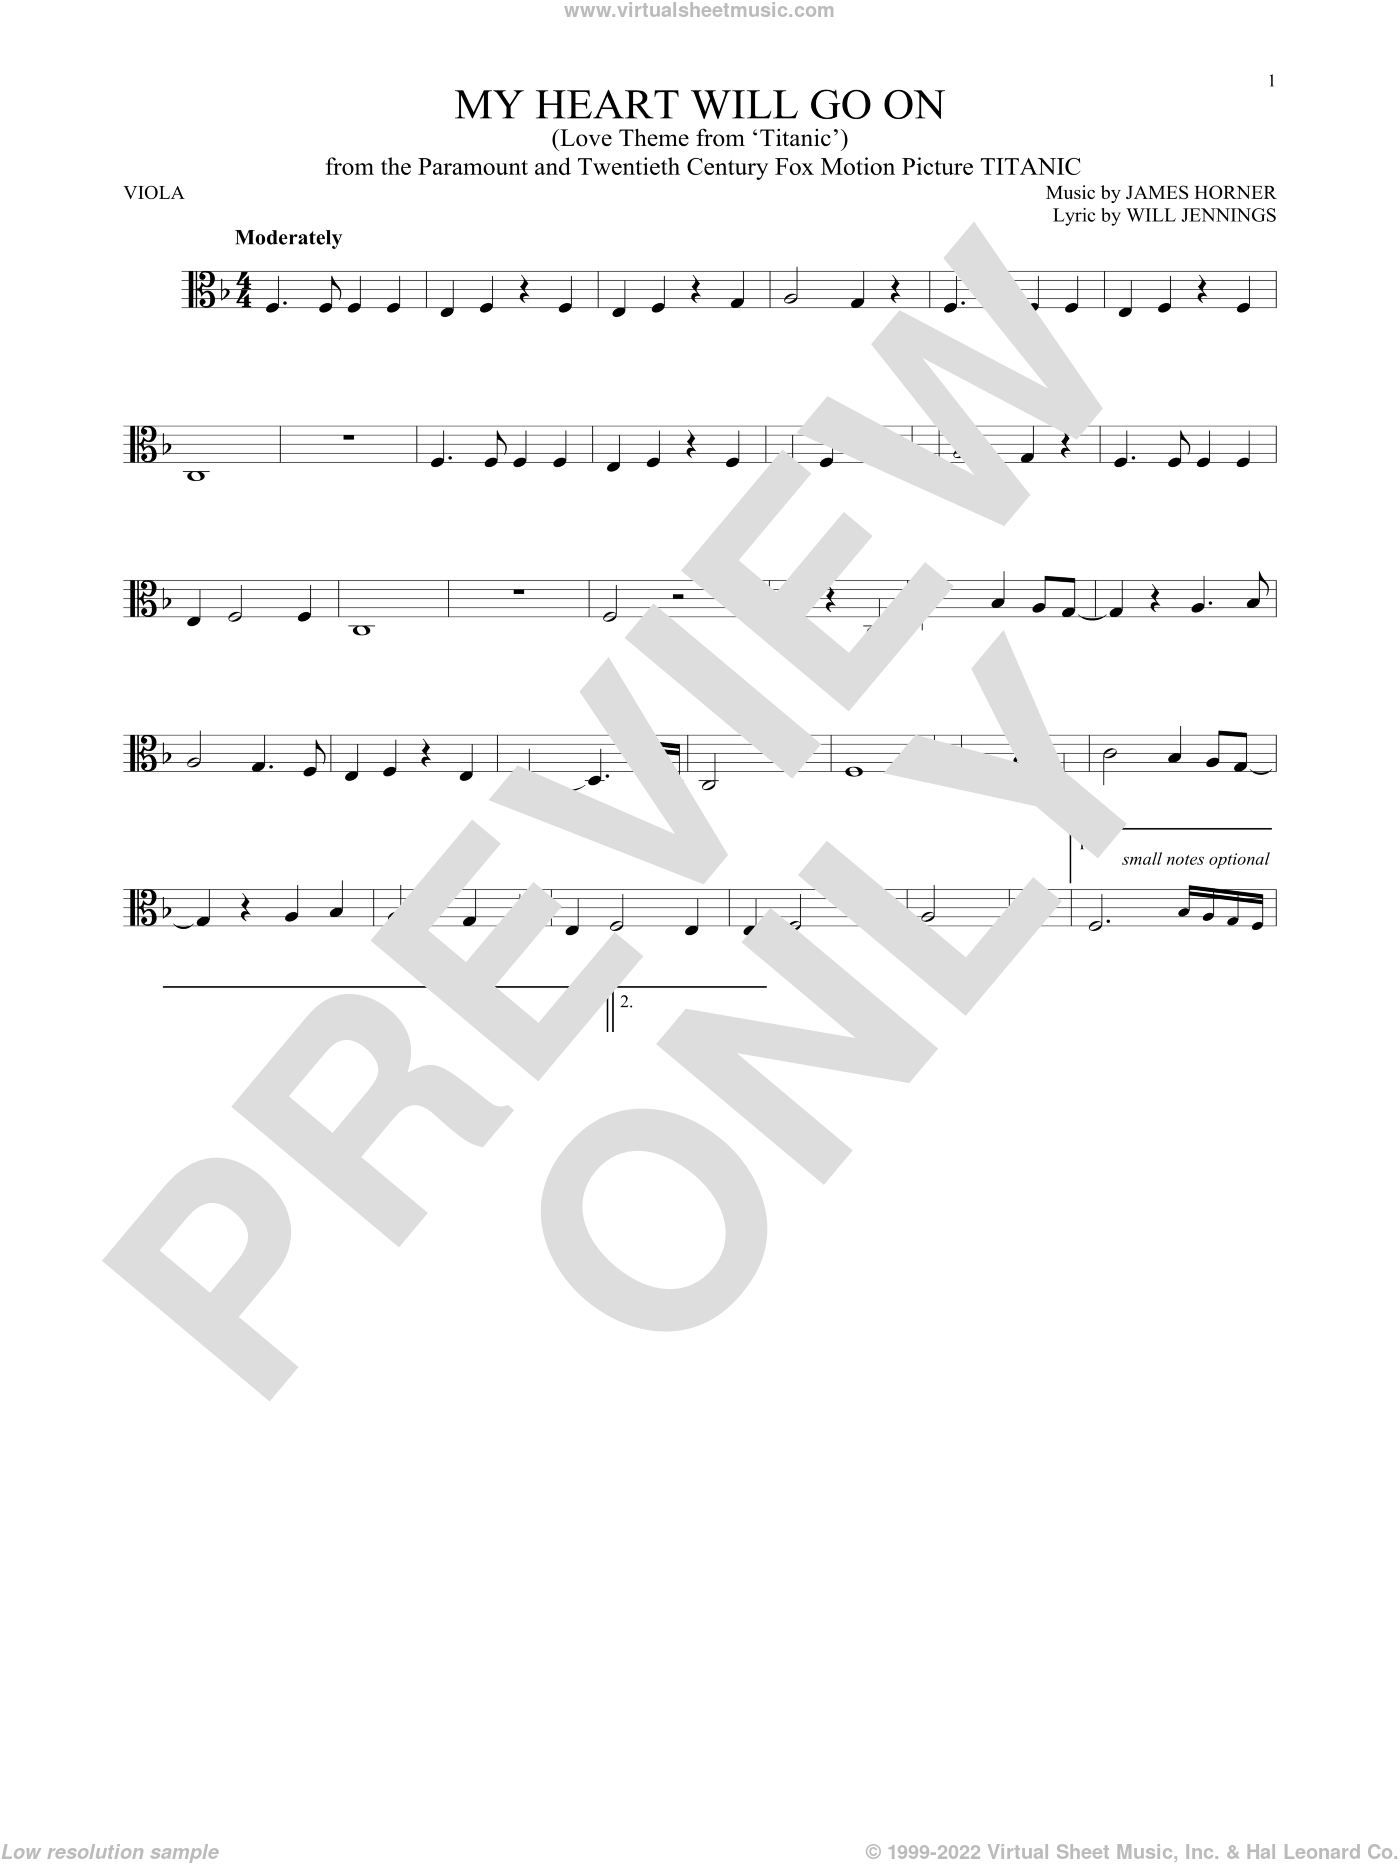 My Heart Will Go On (Love Theme From Titanic) sheet music for viola solo